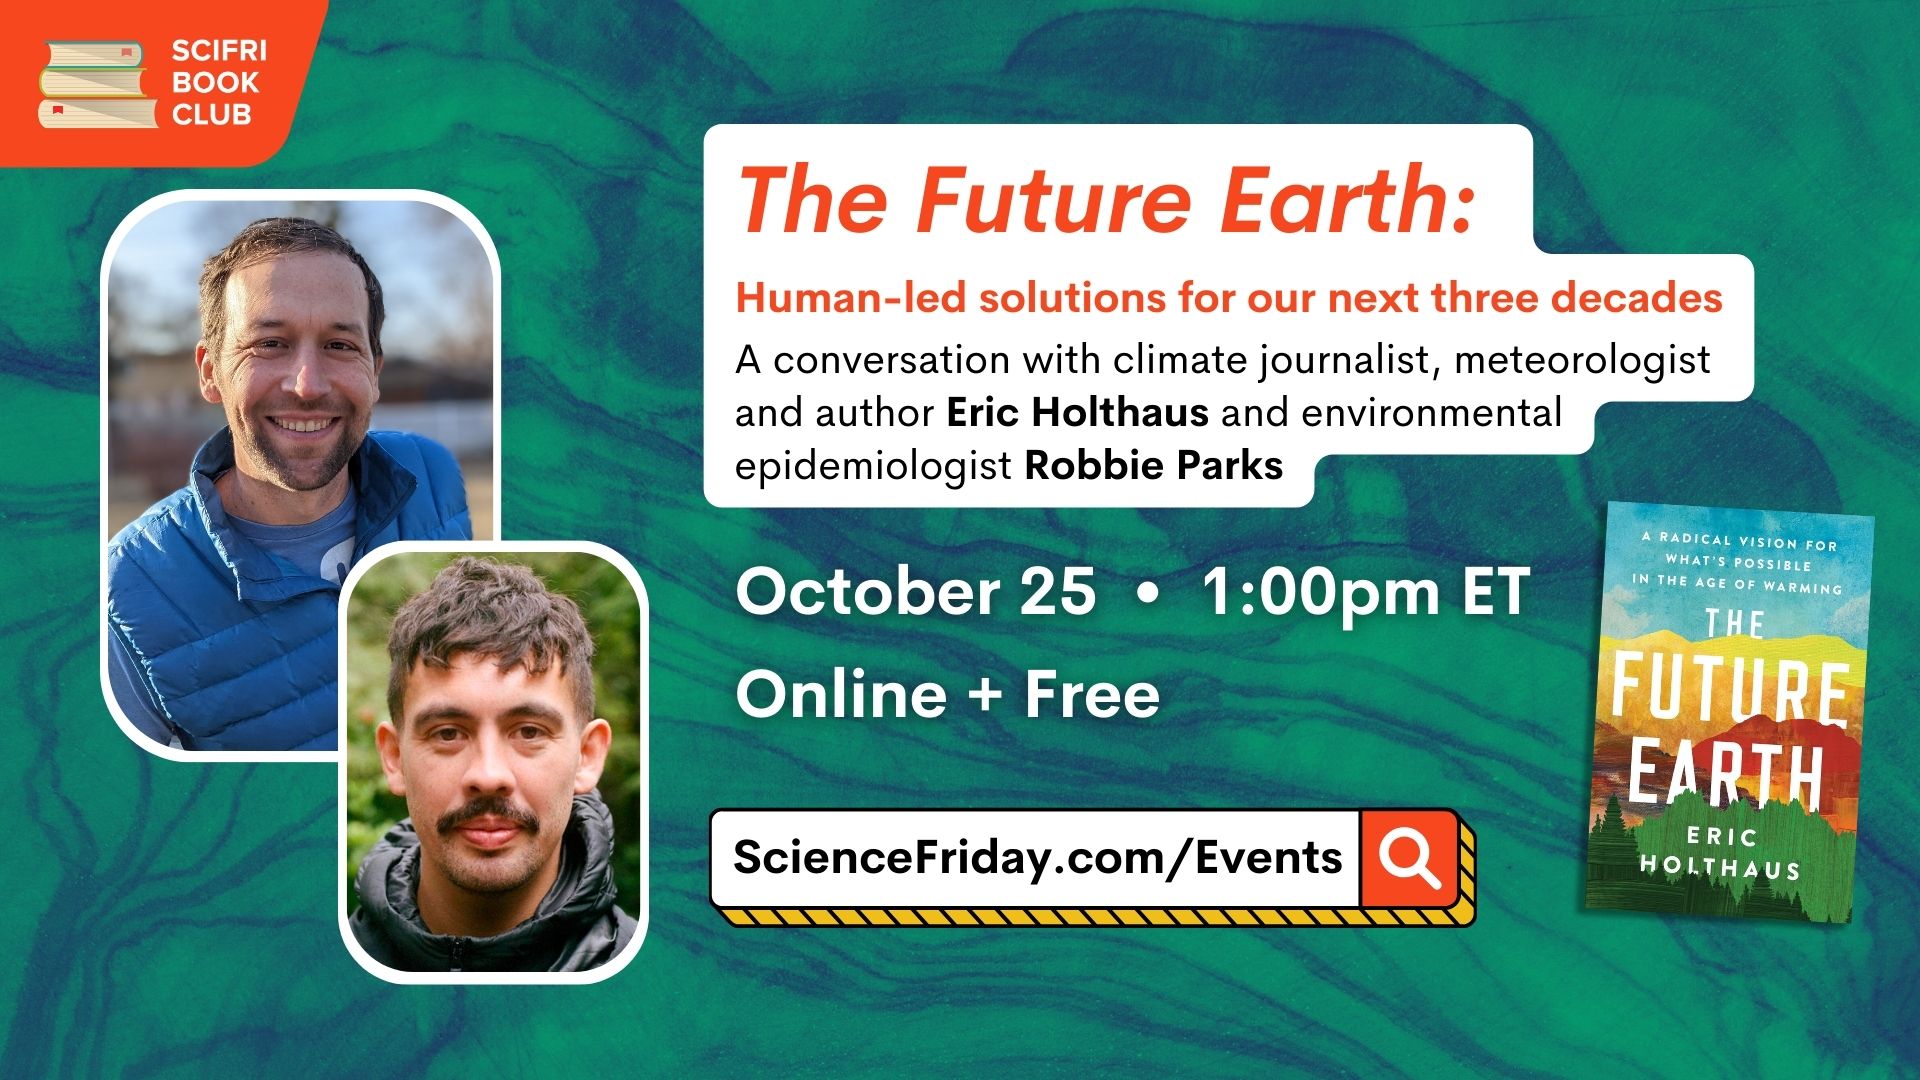 Event promotional image. In top left corner, SciFri Book Club logo, with event info below, which reads: The Future Earth: Human-led solutions for our next three decades. A conversation with climate journalist, meteorologist and author Eric Holthaus and environmental epidemiologist Robbie Parks. October 25, 1:00pm ET, Online + Free, ScienceFriday.com/Events. To the right of the frame is an image of THE FUTURE EARTH book cover. To the right of the frame is a two headshots of men smiling at the camera. The background is a photo of wood grain, tinted dark blue and green.